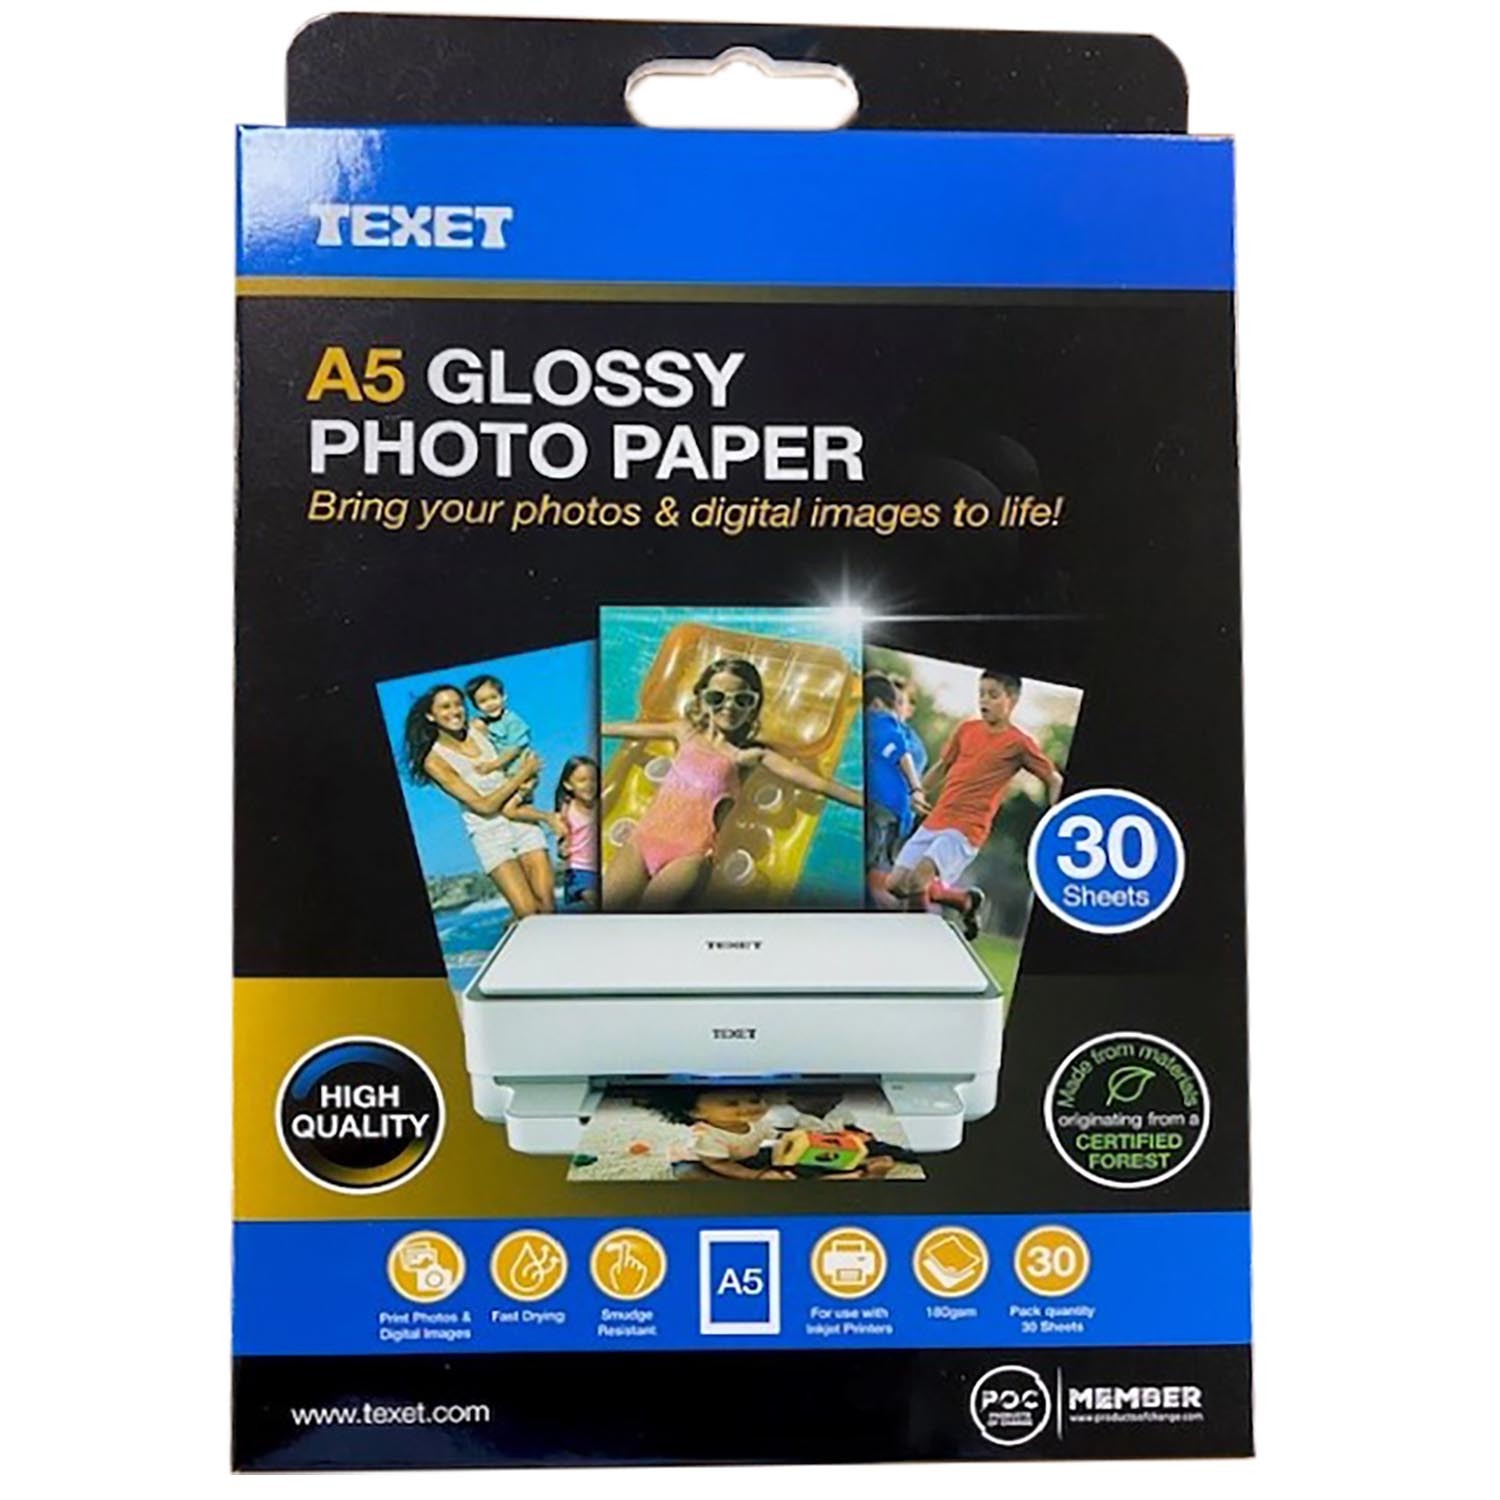 Pack of 30 Texet Glossy Photo Paper - A5 Image